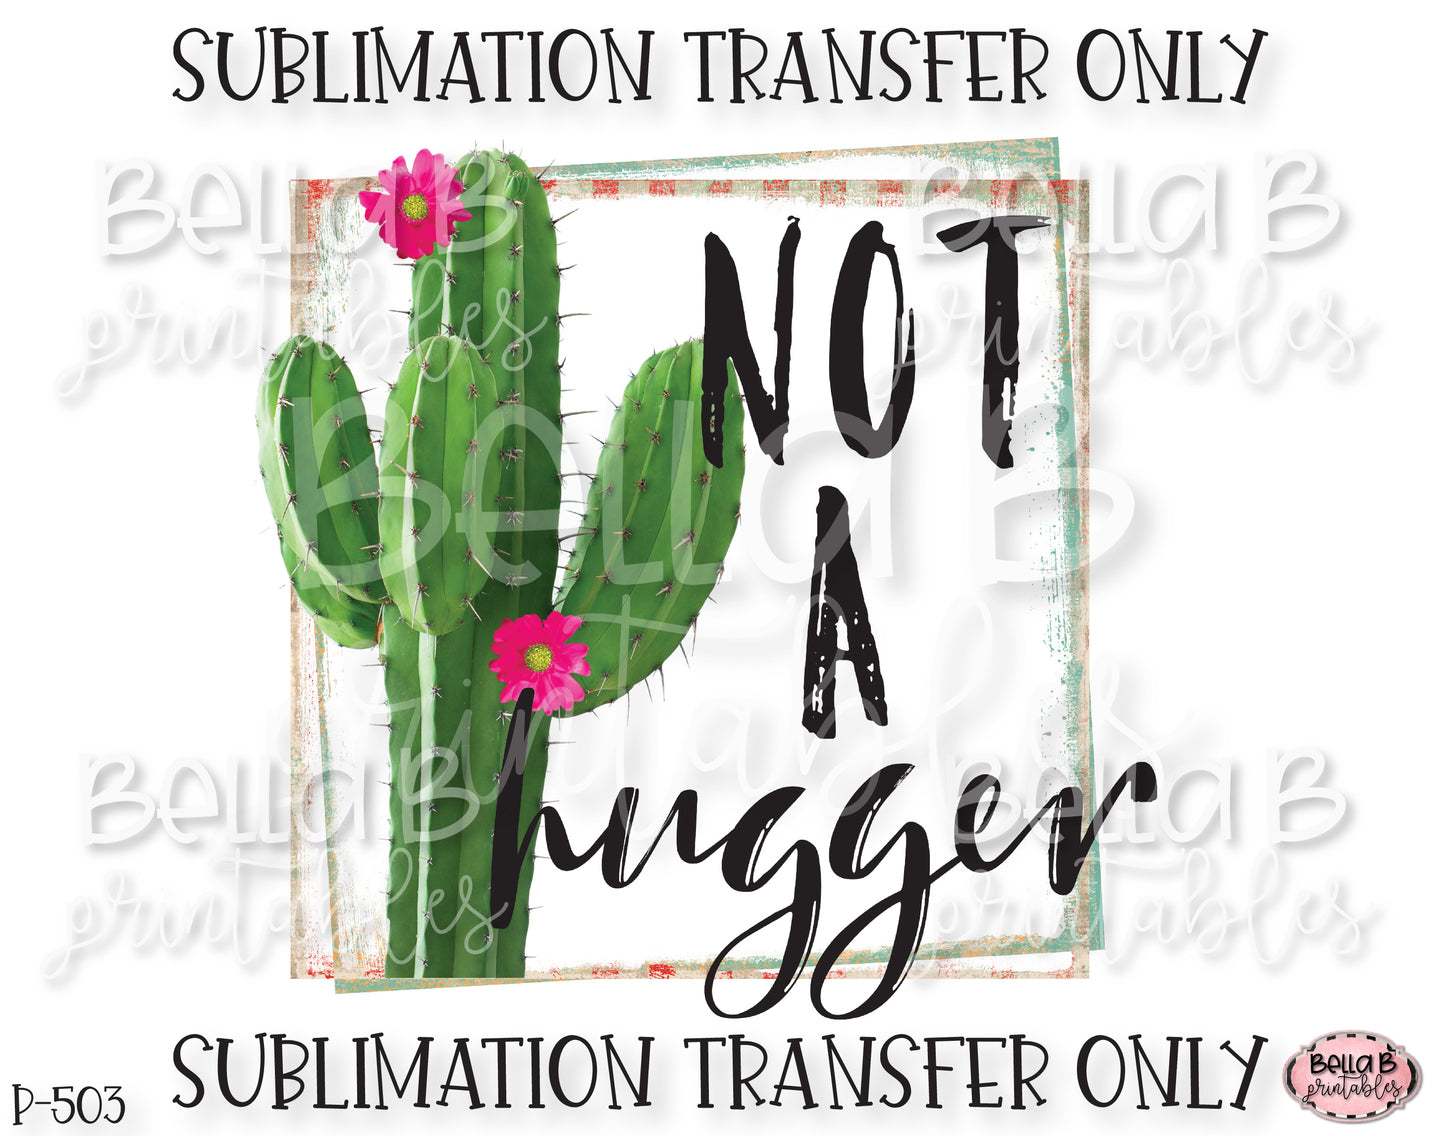 Funny Cactus Sublimation Transfer, Not A Hugger, Ready To Press, Heat Press Transfer, Sublimation Print